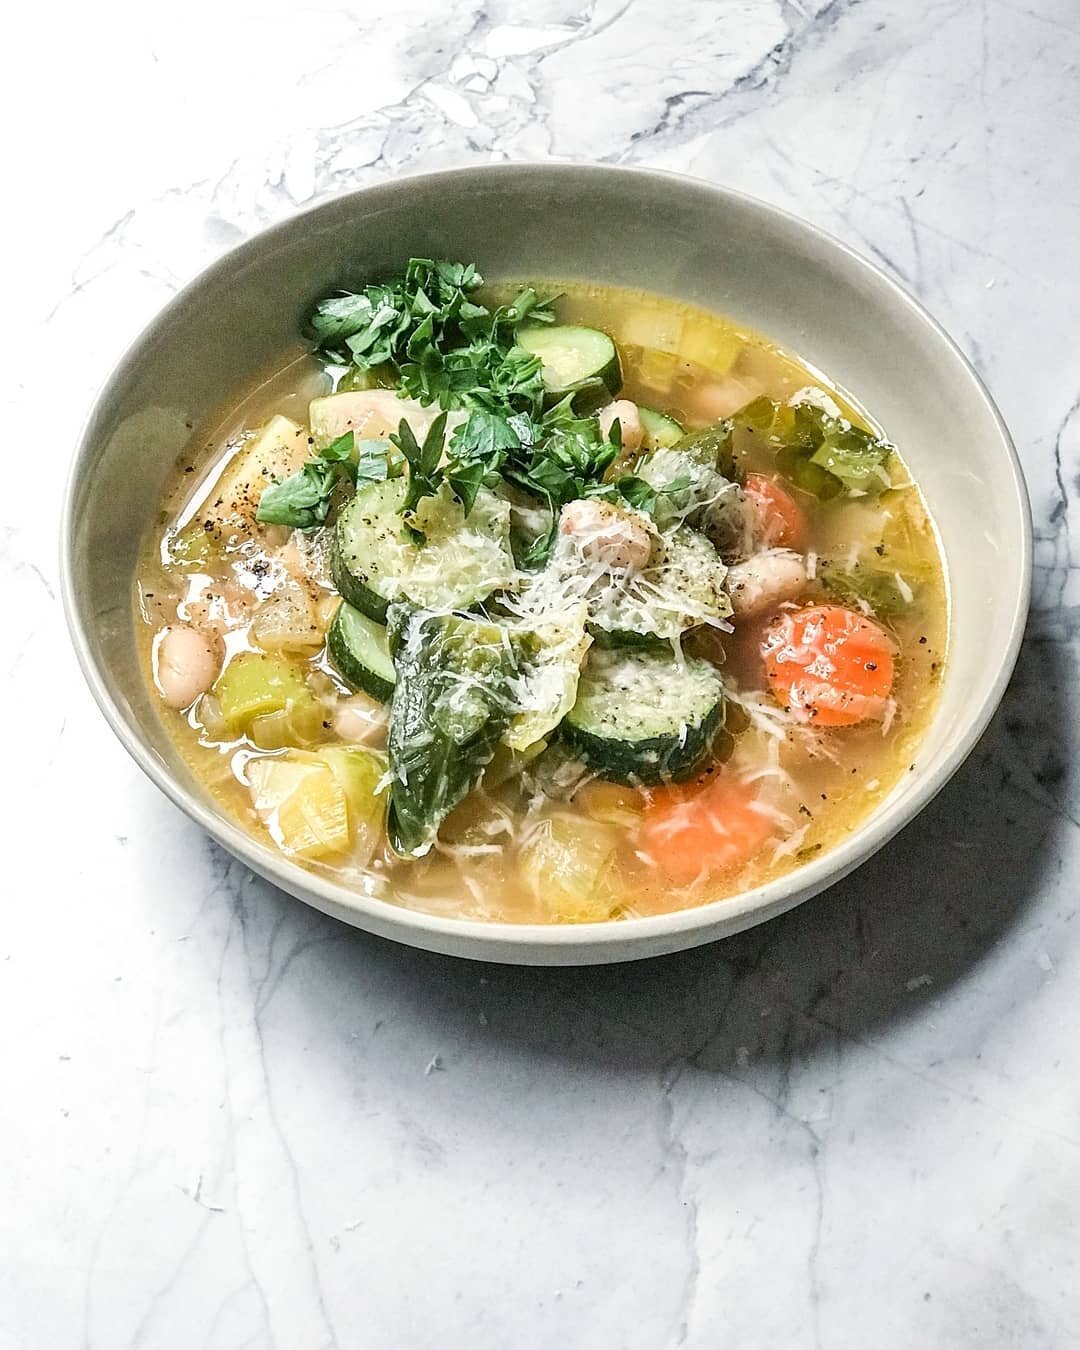 Vegetarian dinner inspo: cannellini beans in a vegetable stock made with alllll the vegetables I have on hand, frozen, added to with more veg, simmered and frozen again, and now it&rsquo;s the richest broth ever. Add zucchini, carrots, potatoes, gree